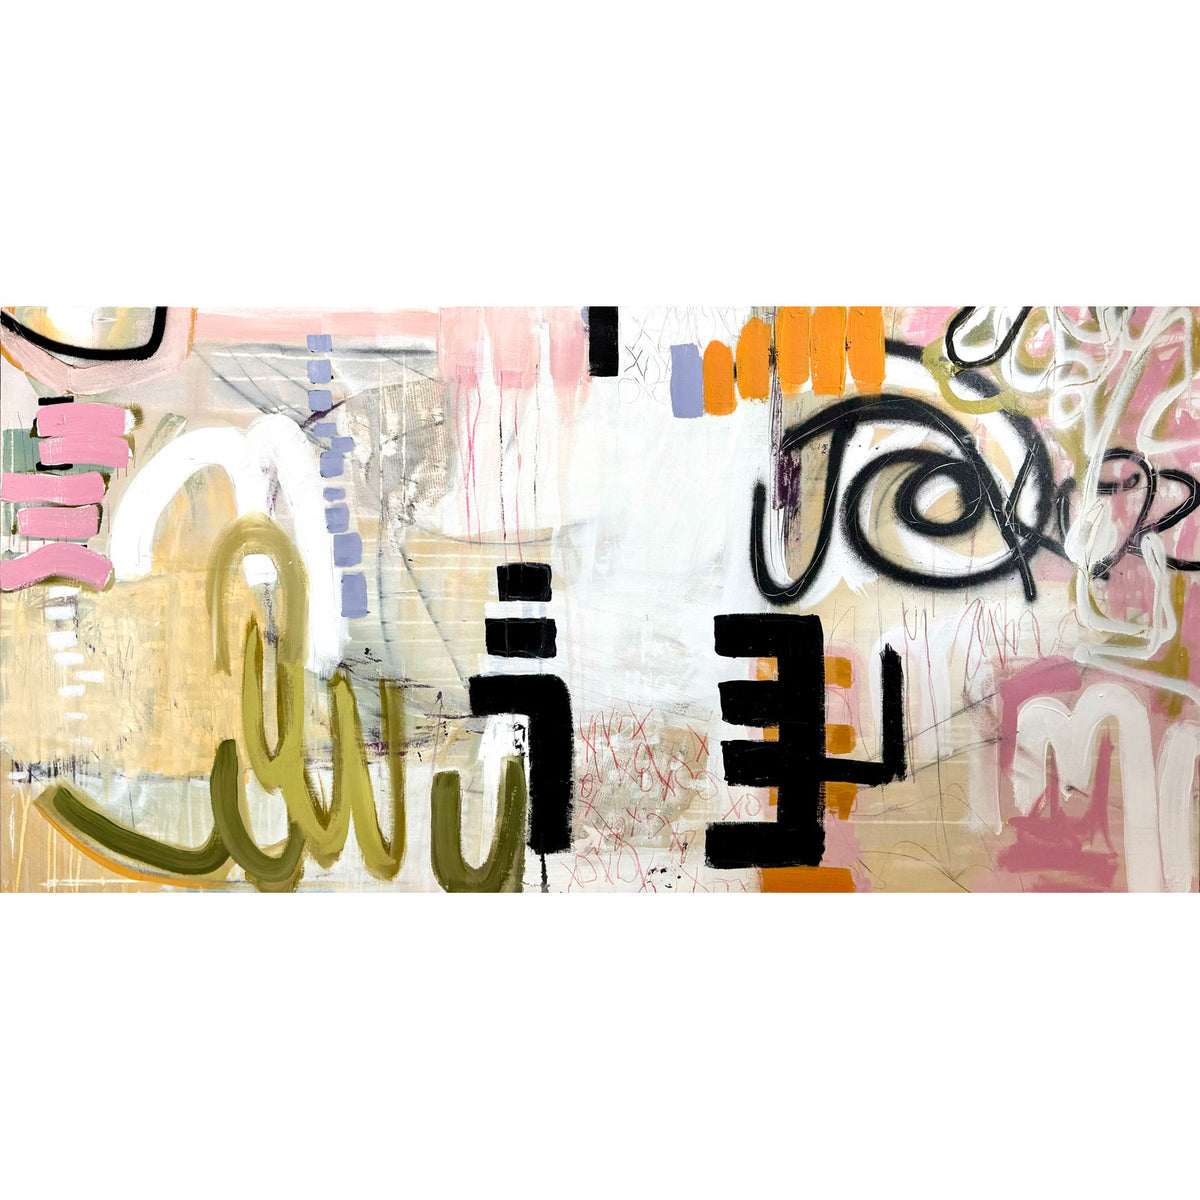 Suzanne Metz - Creating Tension, 30" x 60"